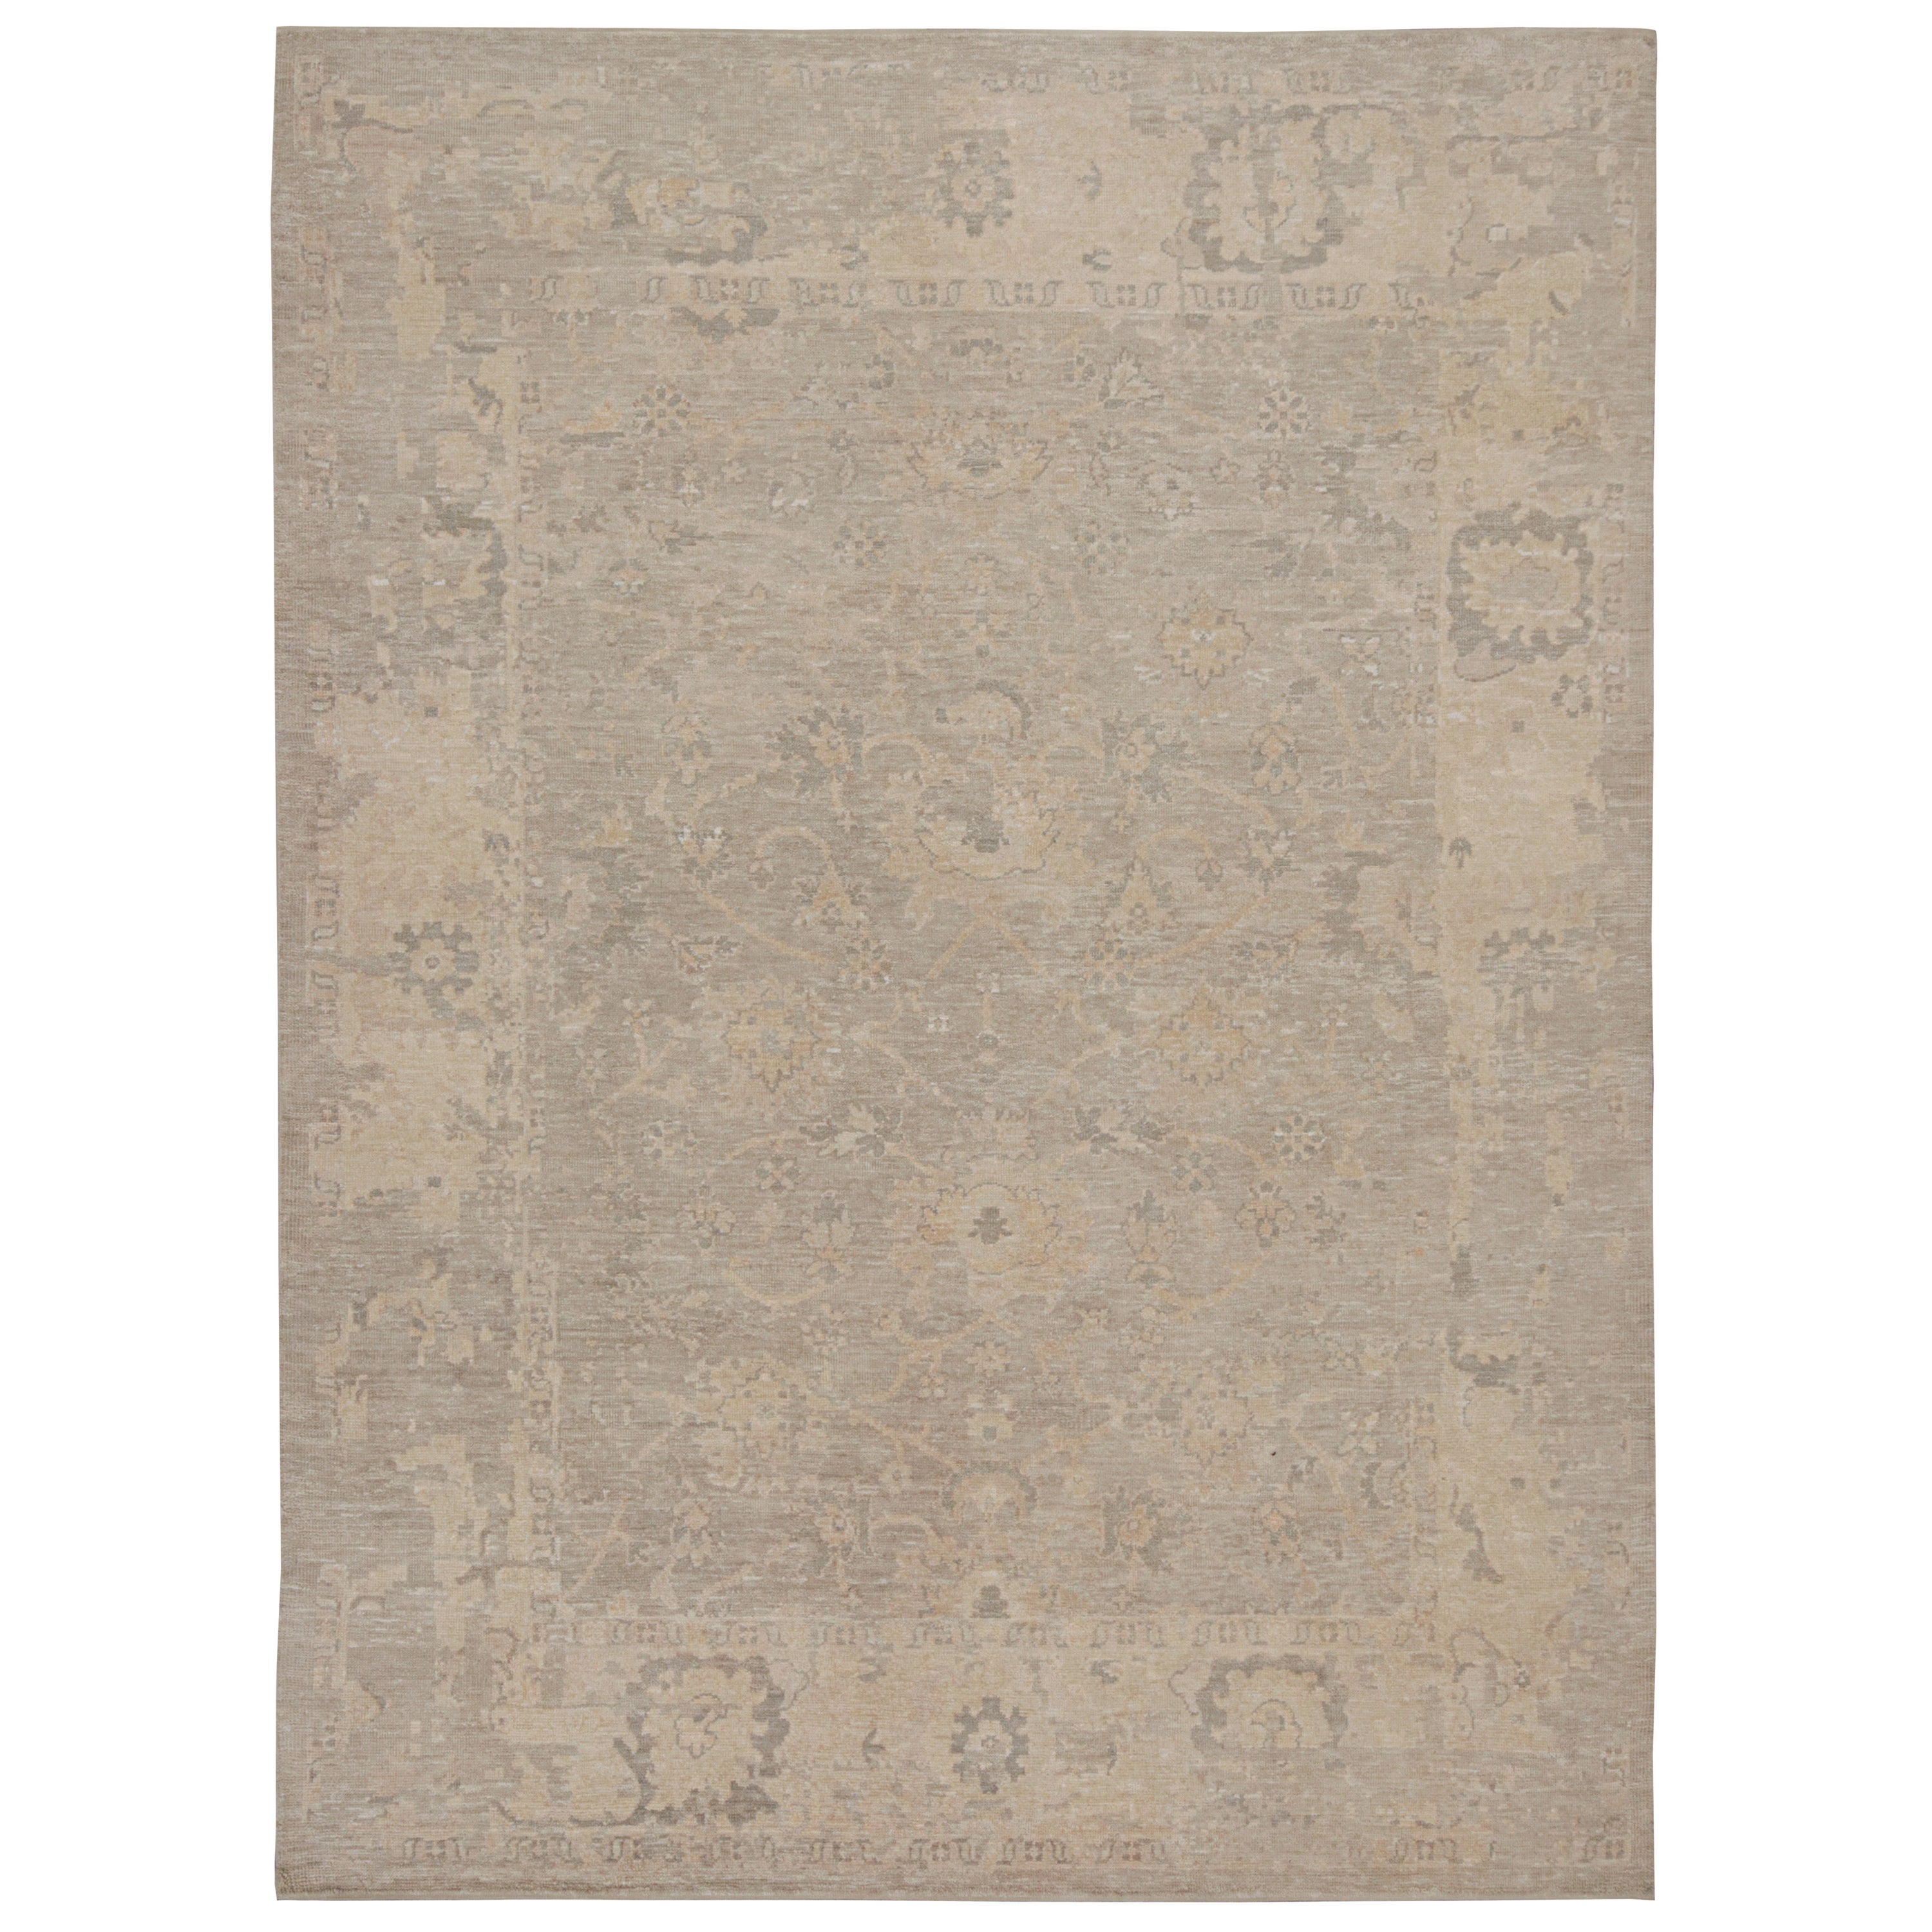 Rug & Kilim’s Oushak Style Rug with Taupe, Beige and Gray Floral Patterns